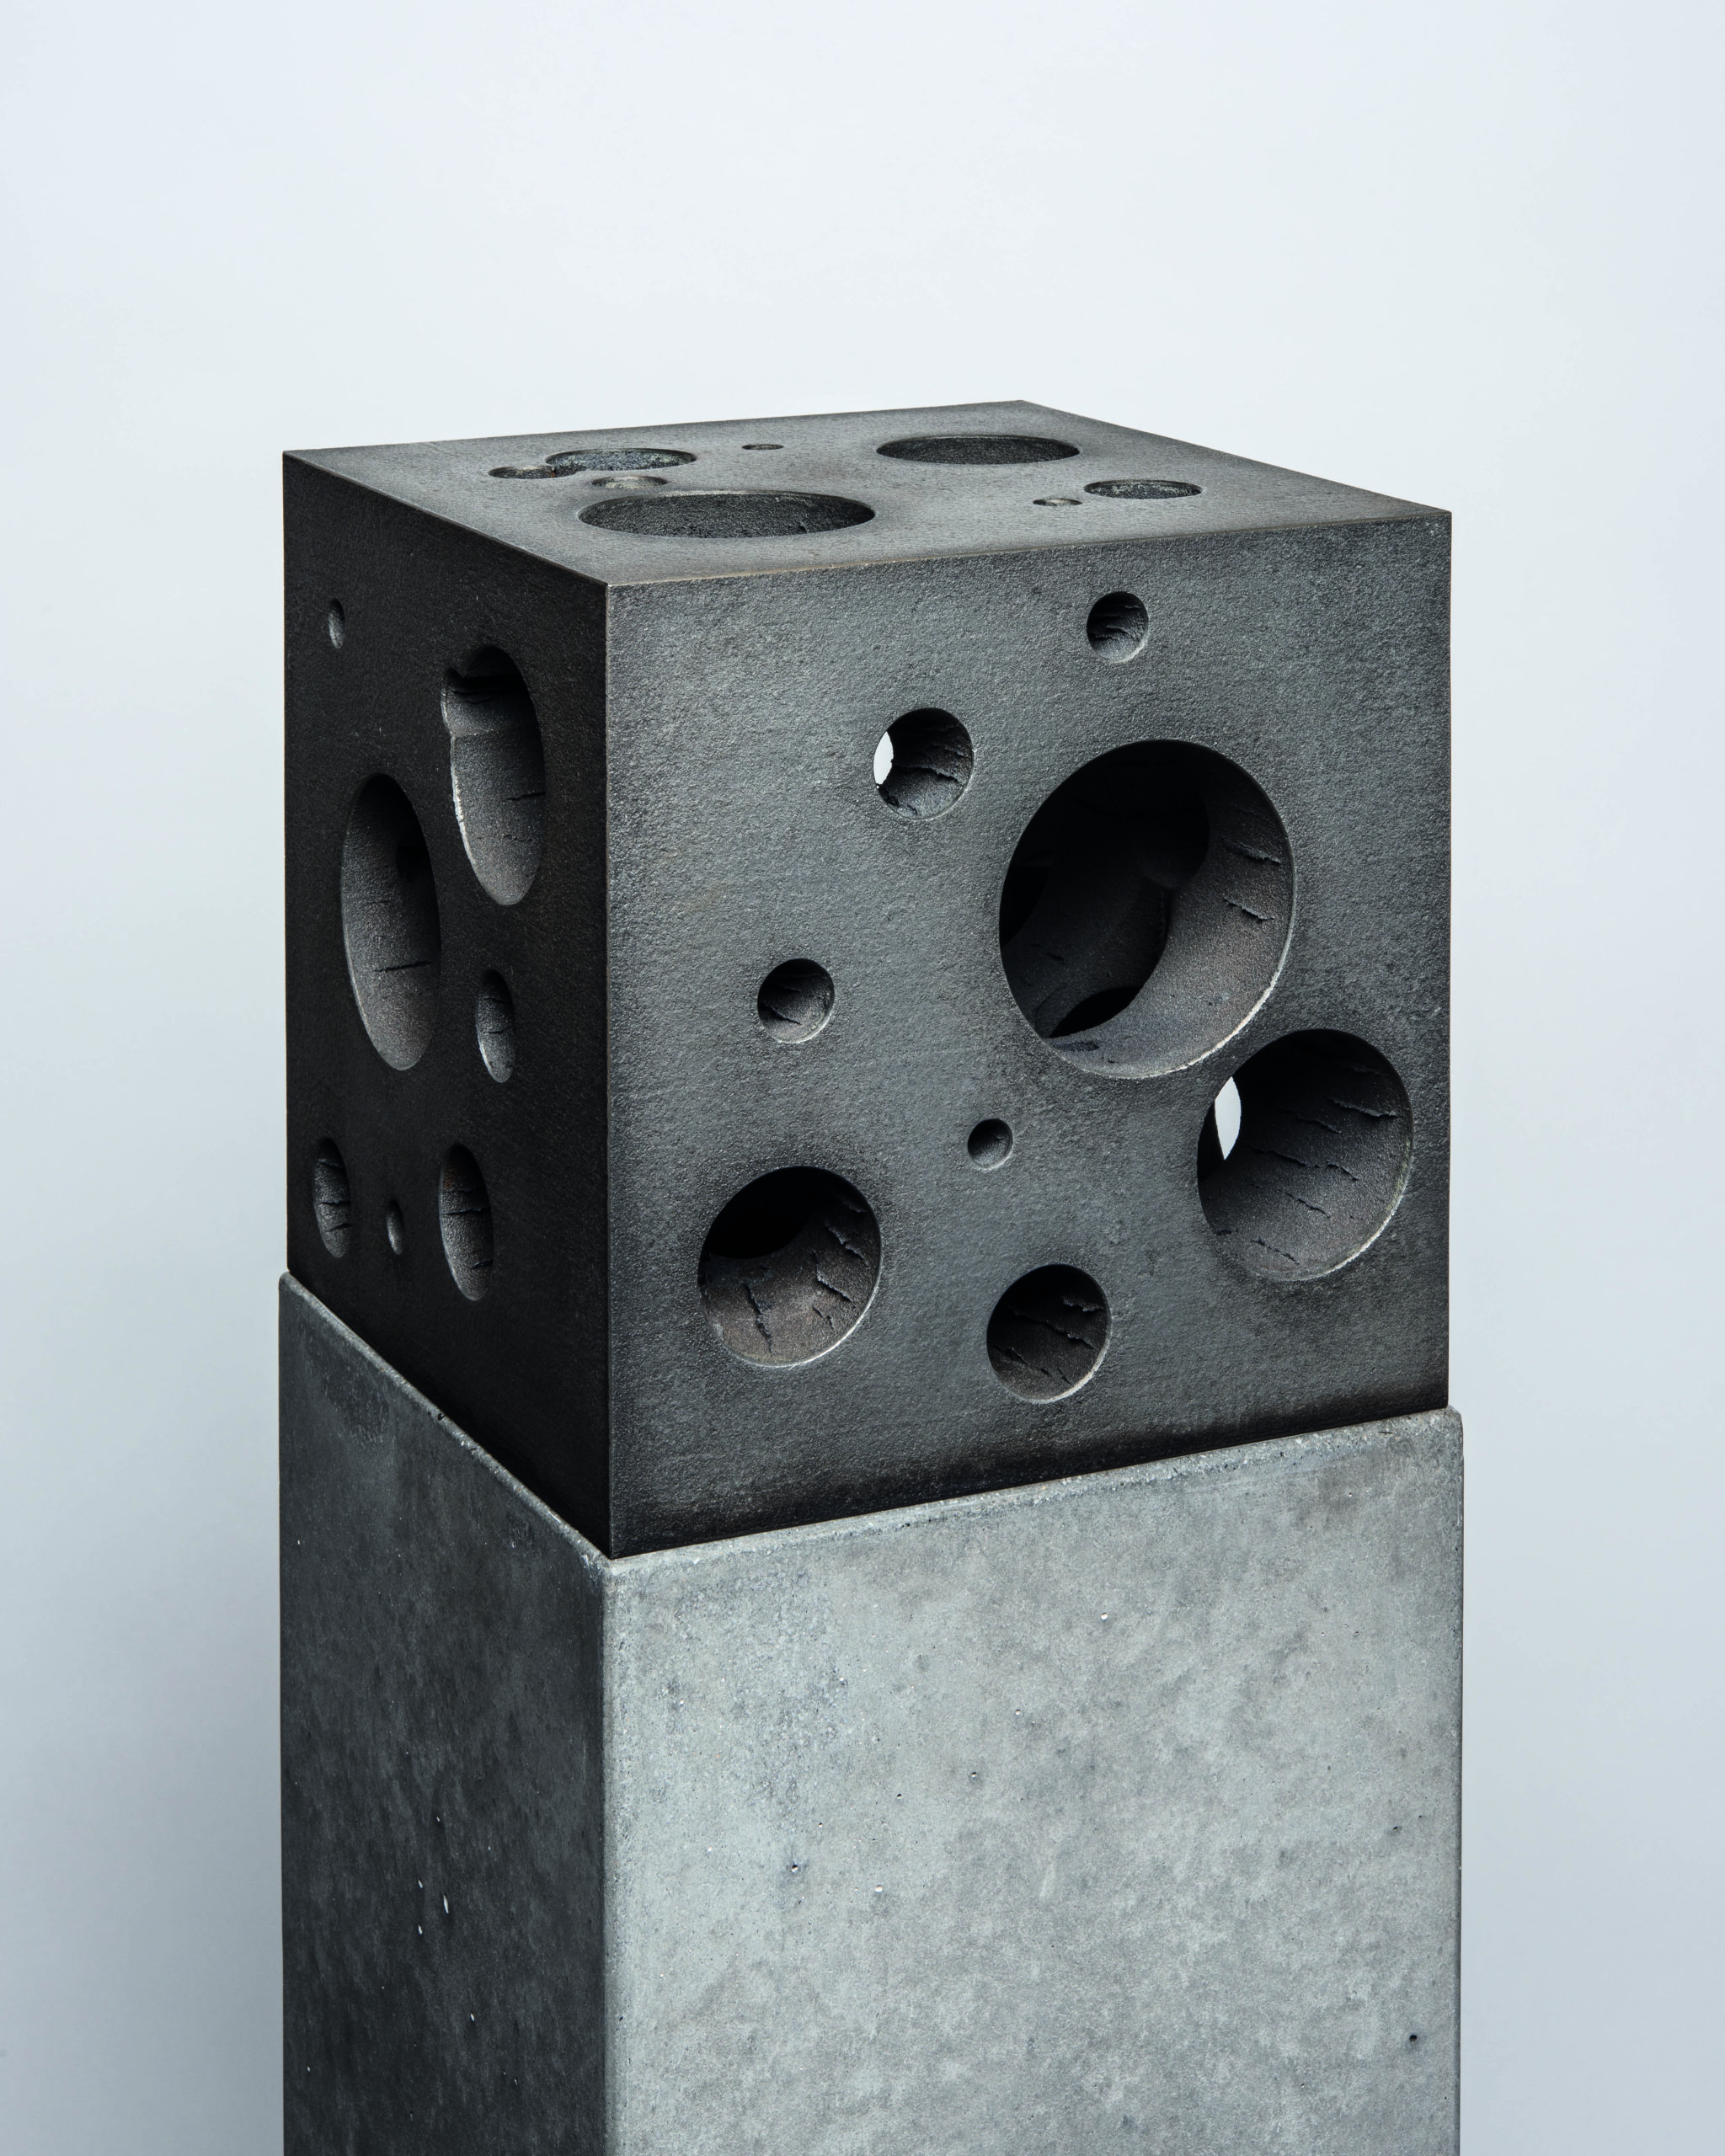 

											Tom Joyce</b>

											<em>
												Core Series</em> 

											<h4>
												Santa Fe: May 6 - July 30, 2022											</h4>

		                																																<i>Core Negative II,</i>  
																																								2013 (cast) - 2015 (finished), 
																																								cast ductile iron, natural finish (steel filings from projects 1977-2013), concrete, 
																																								10 x 10 x 10 inches 
																								
		                				